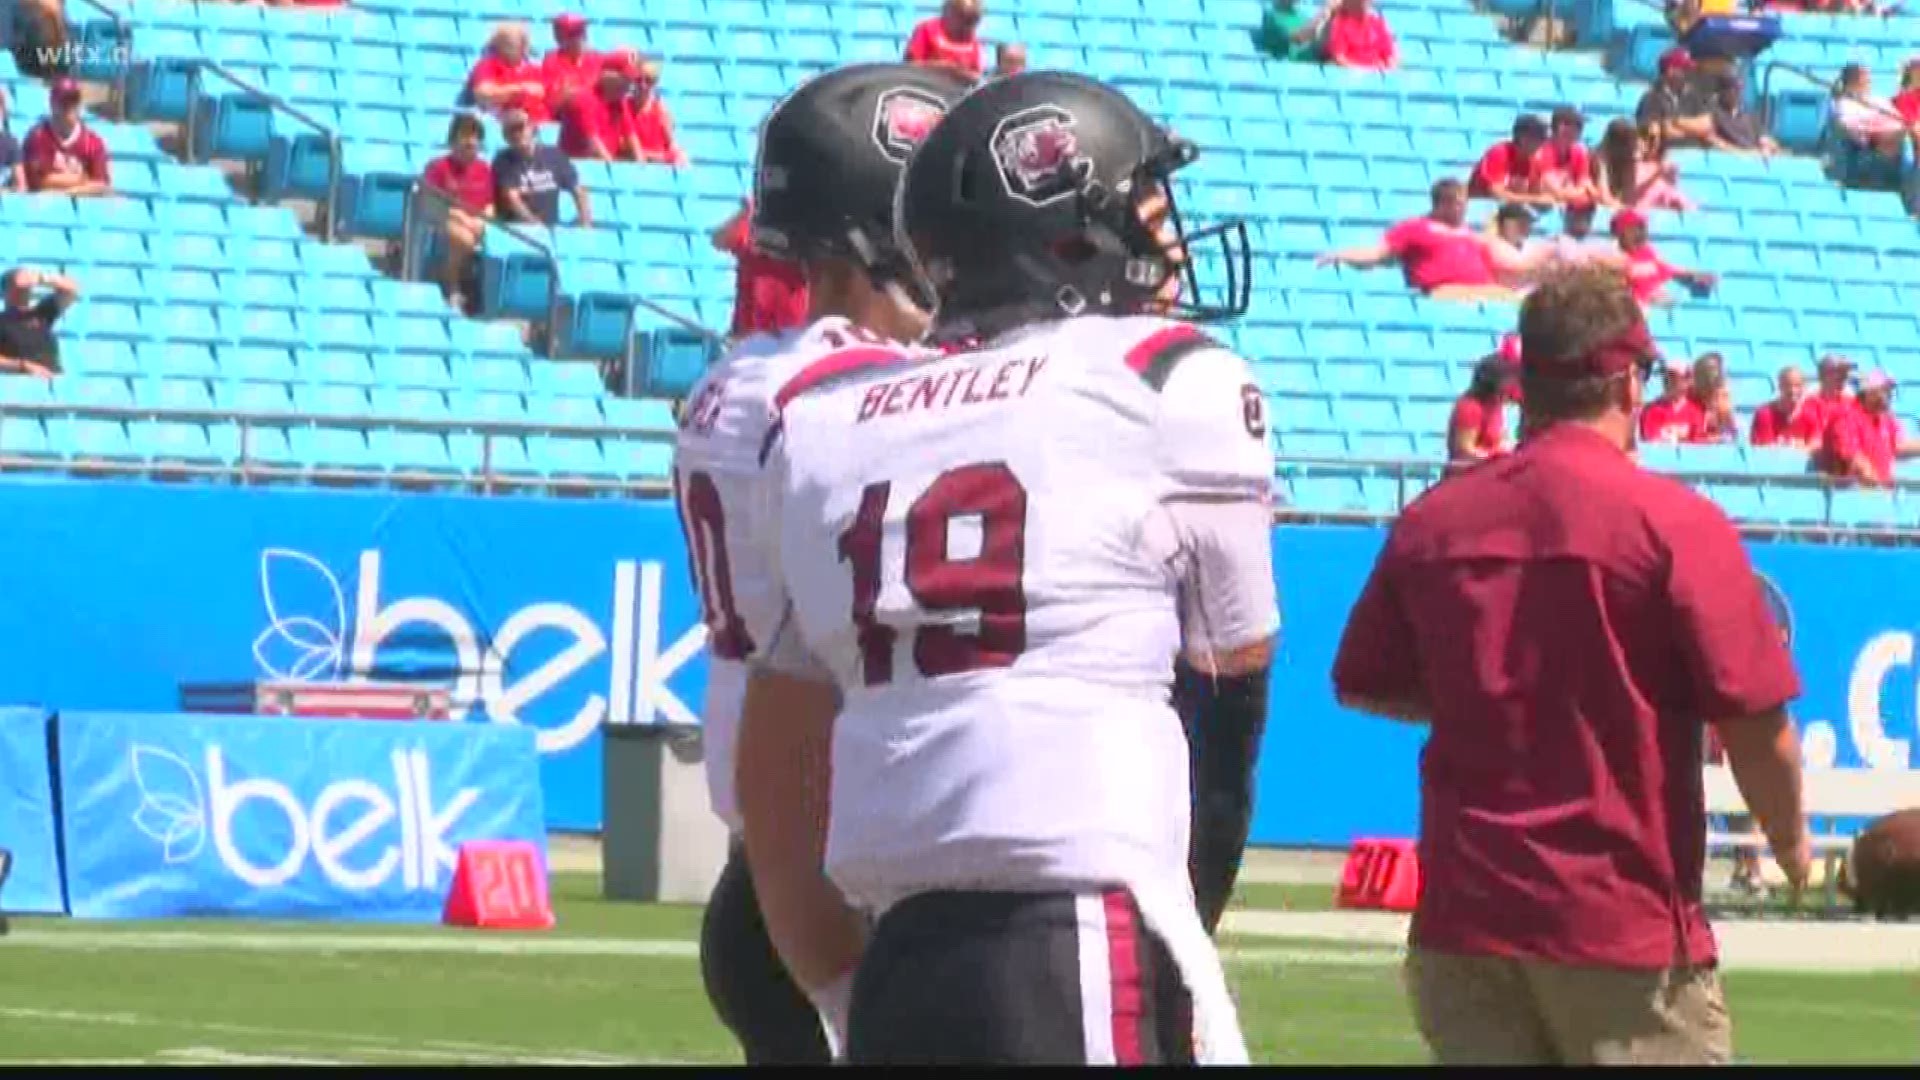 University of South Carolina players talk about upcoming game in Charlotte